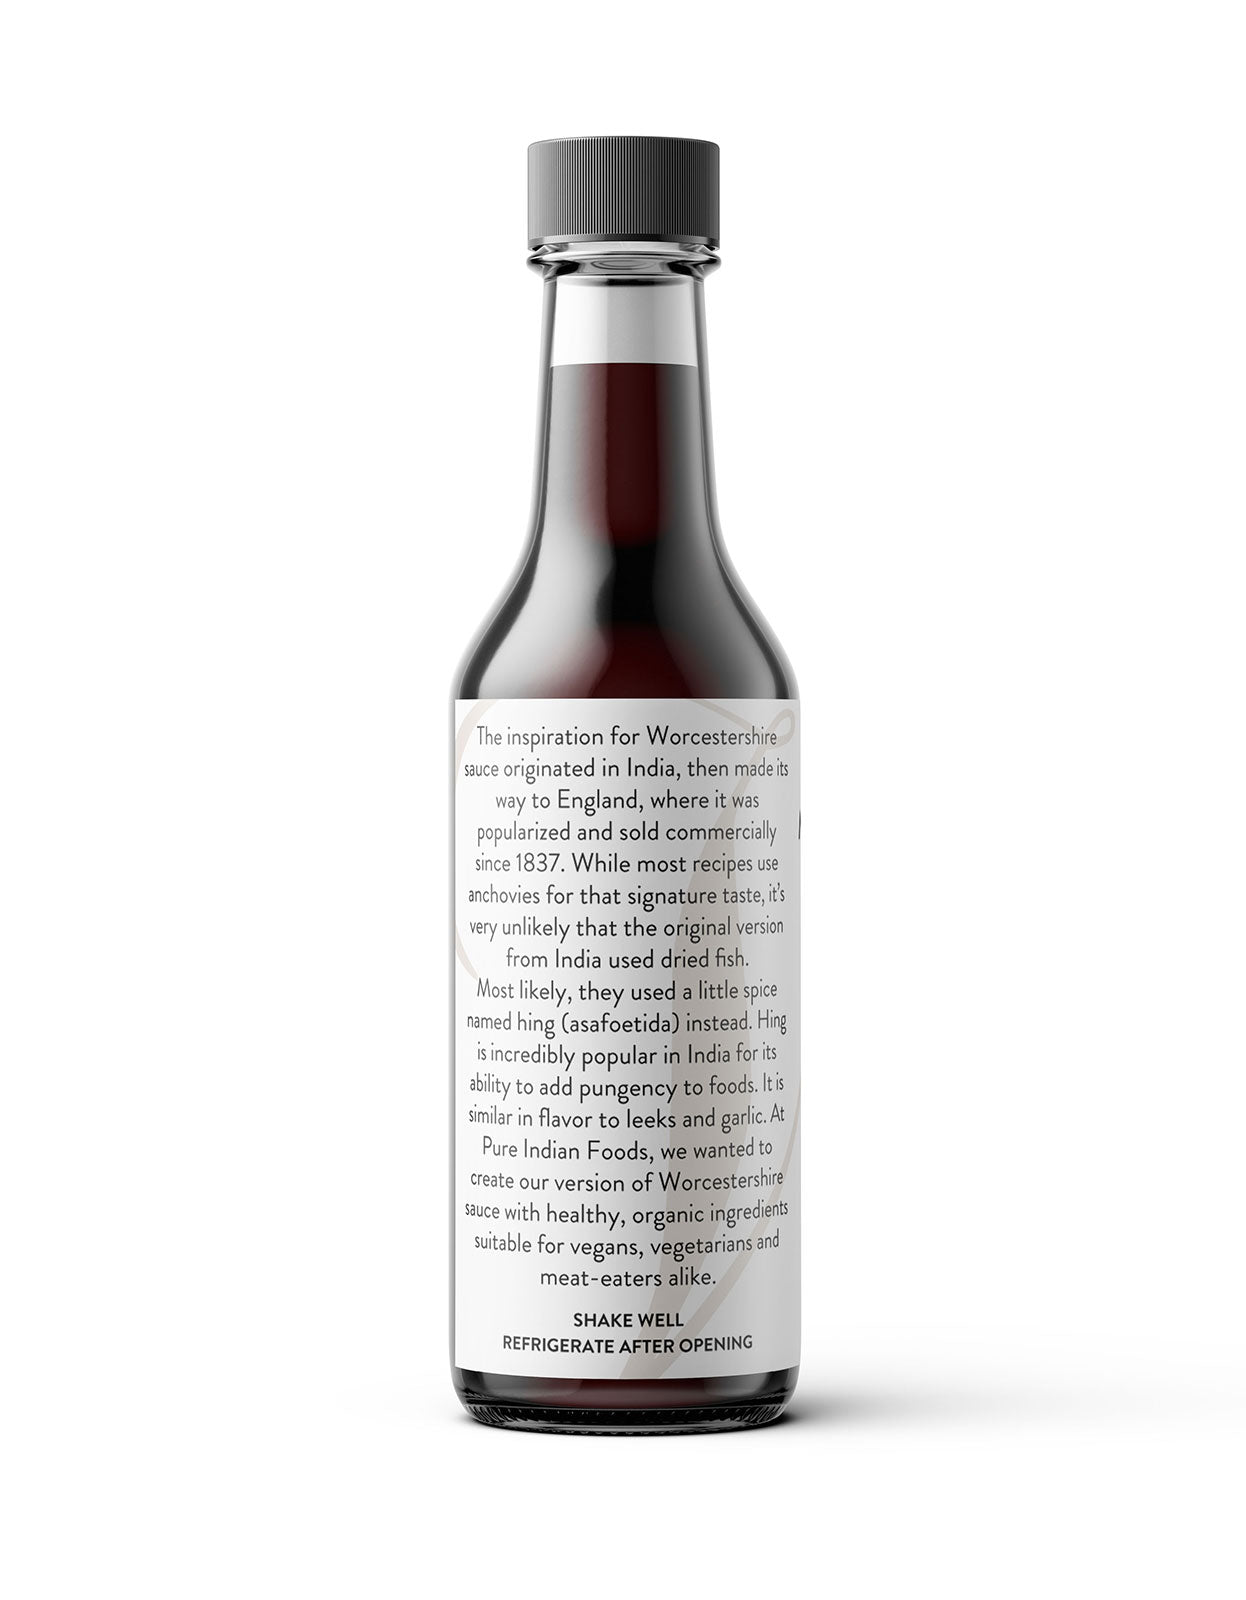 Side label of Pure Indian Foods Organic Worcestershire sauce, describing how the sauce was originally inspired by an Indian sauce. Batch tested gluten-free.